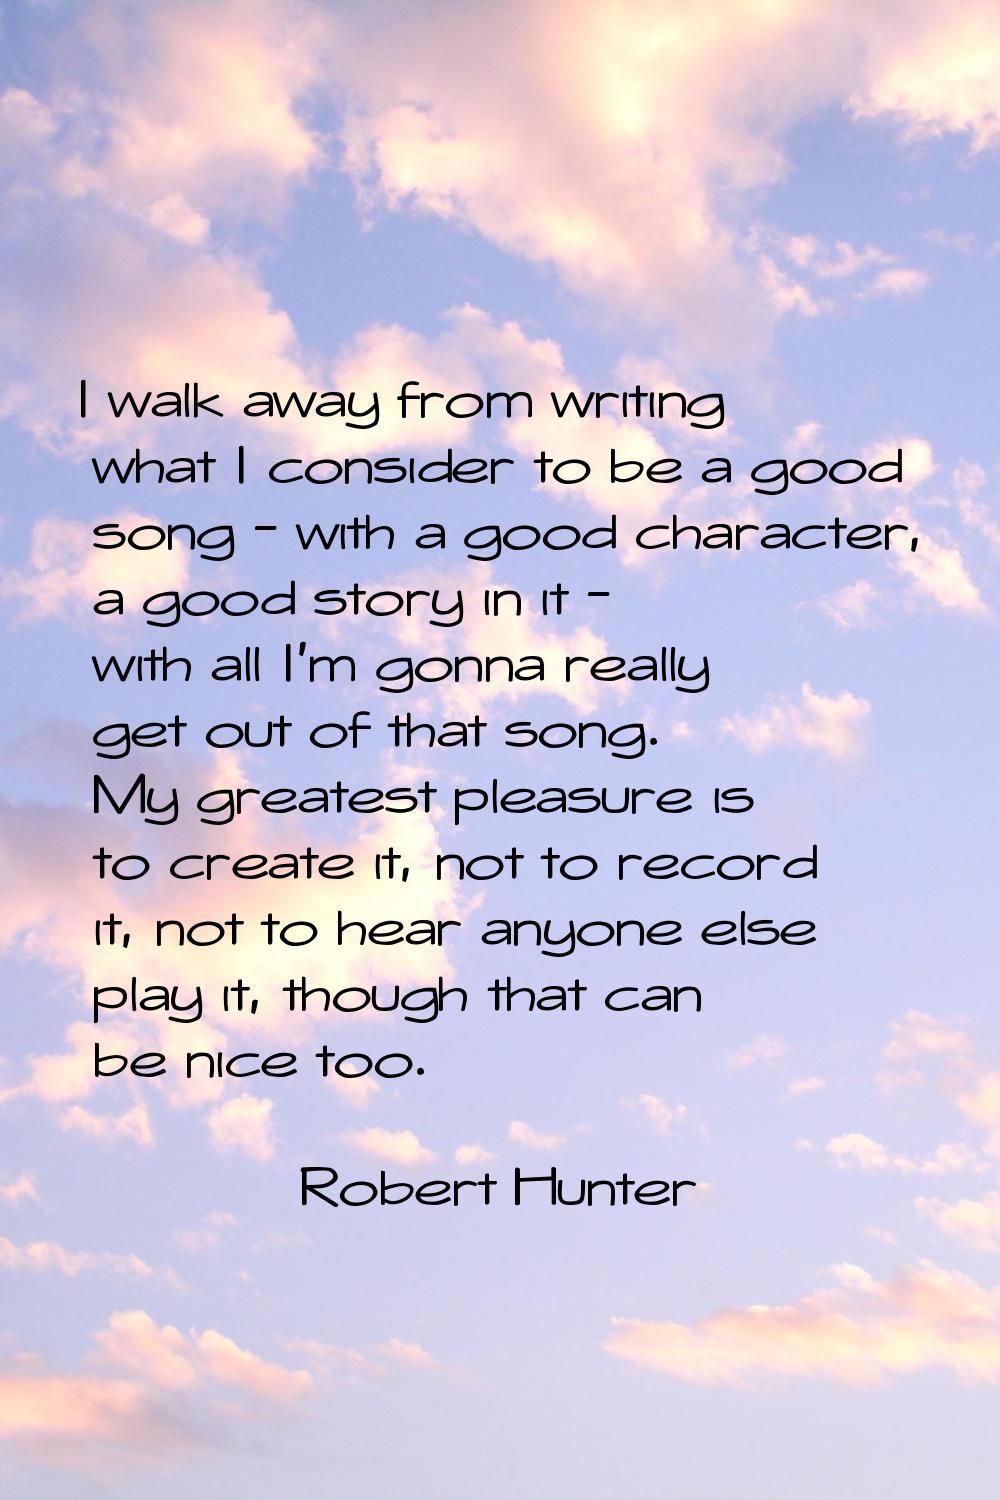 I walk away from writing what I consider to be a good song - with a good character, a good story in